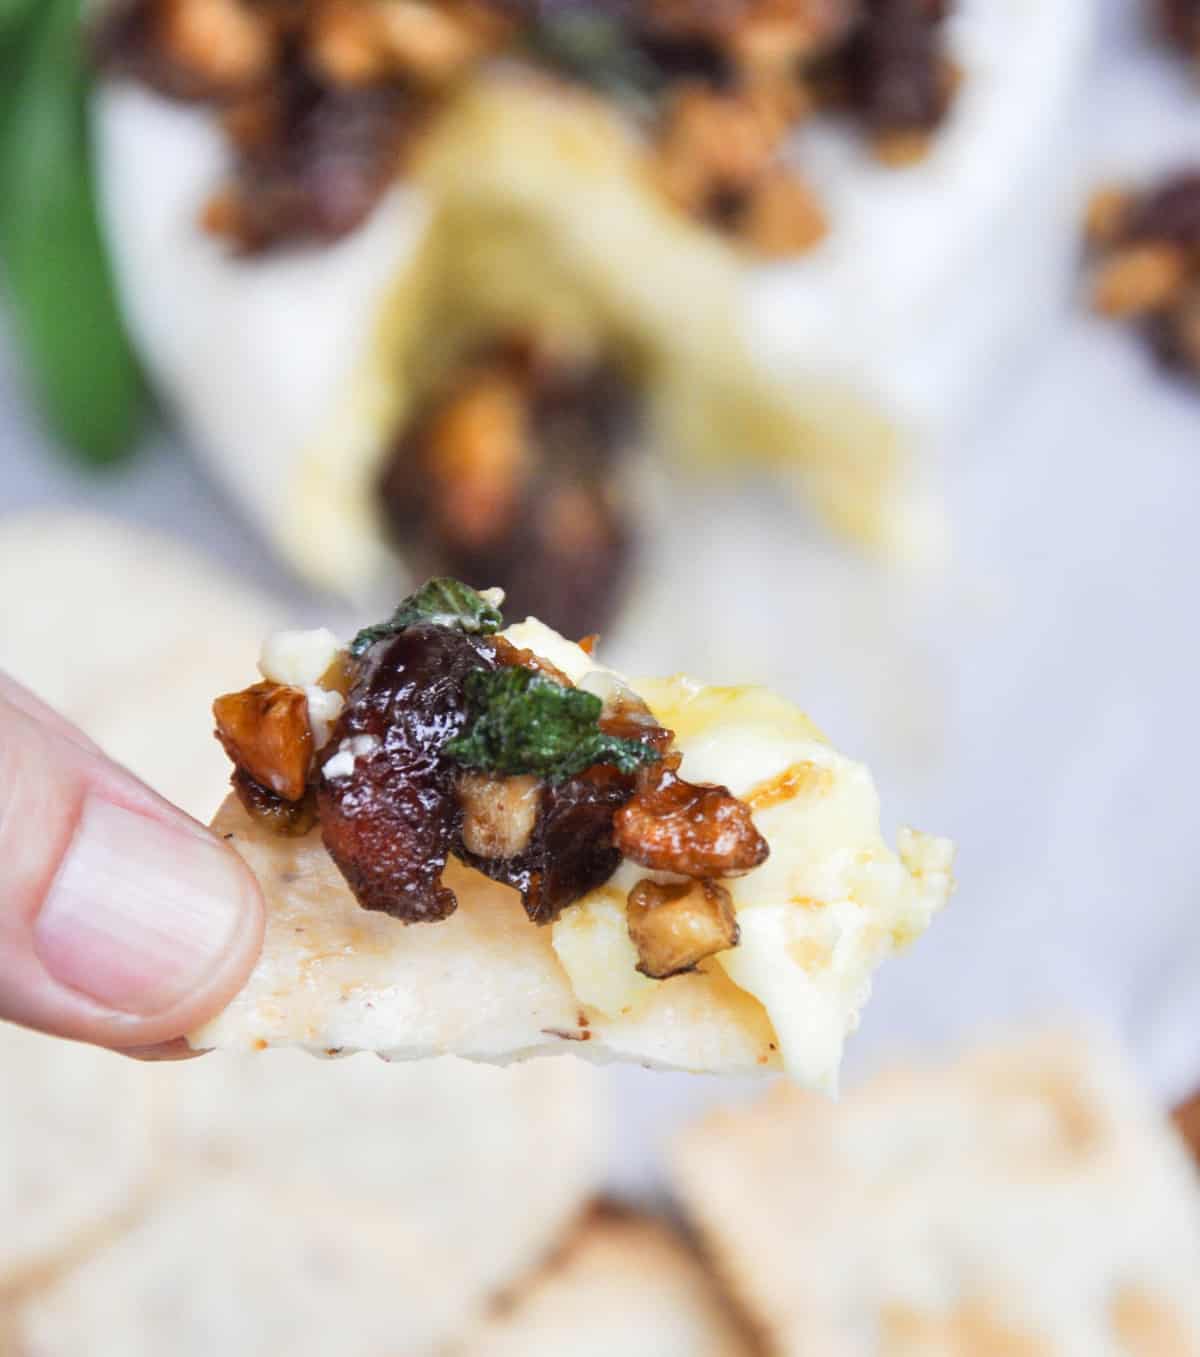 Cracker with Medjool Dates and Walnuts with a bit of Sage